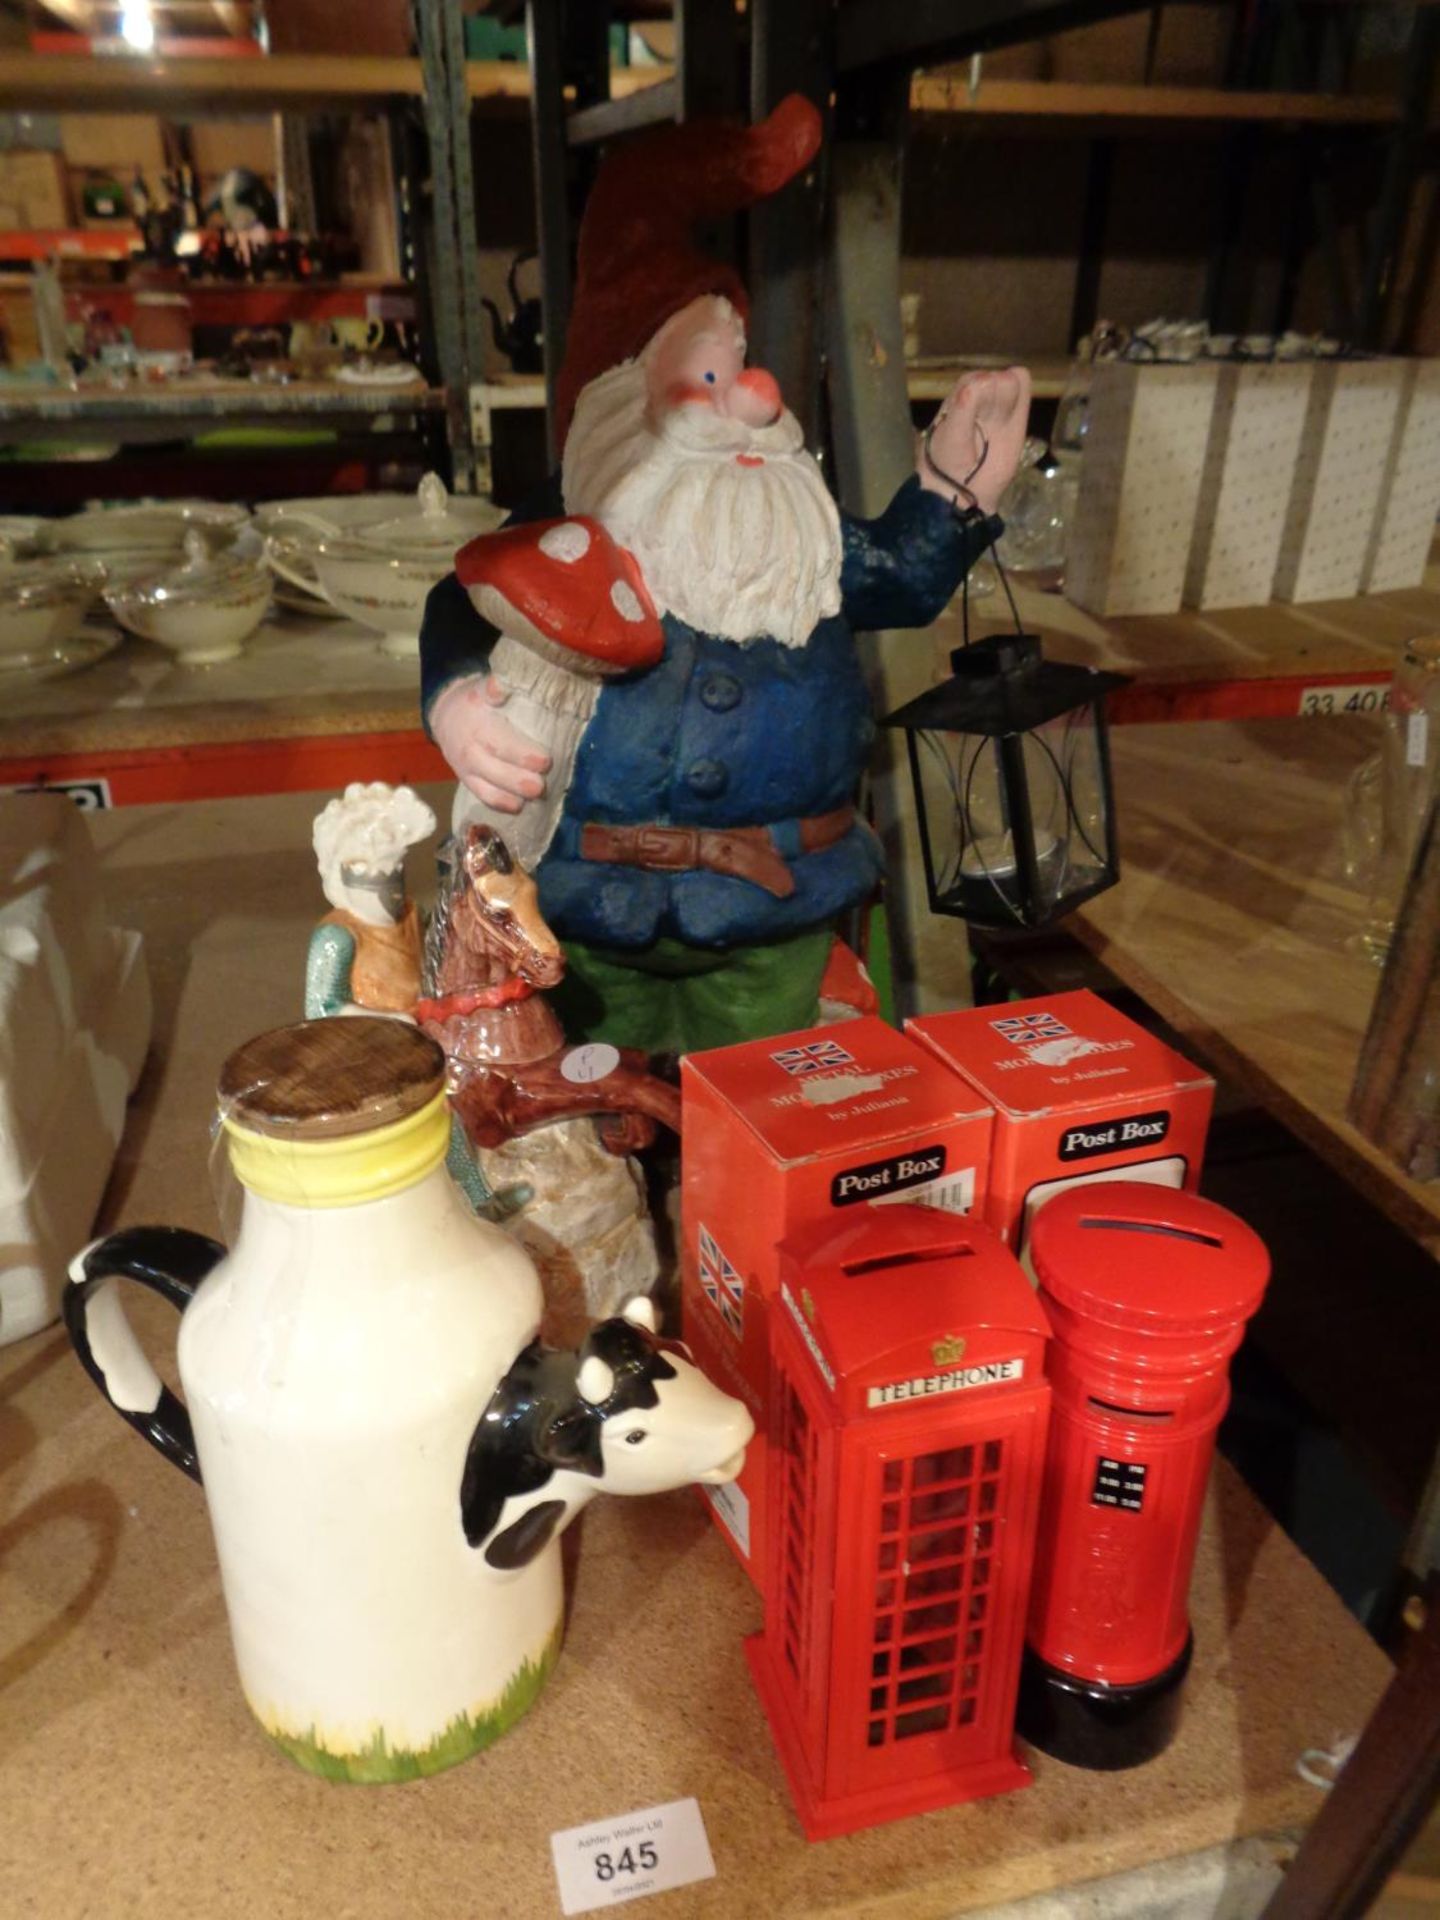 A LARGE GARDEN GNOME, TWO JULIANA MONEY BOXES, A JUG IN THE FORM OF A COW AND A STORAGE JAR IN THE